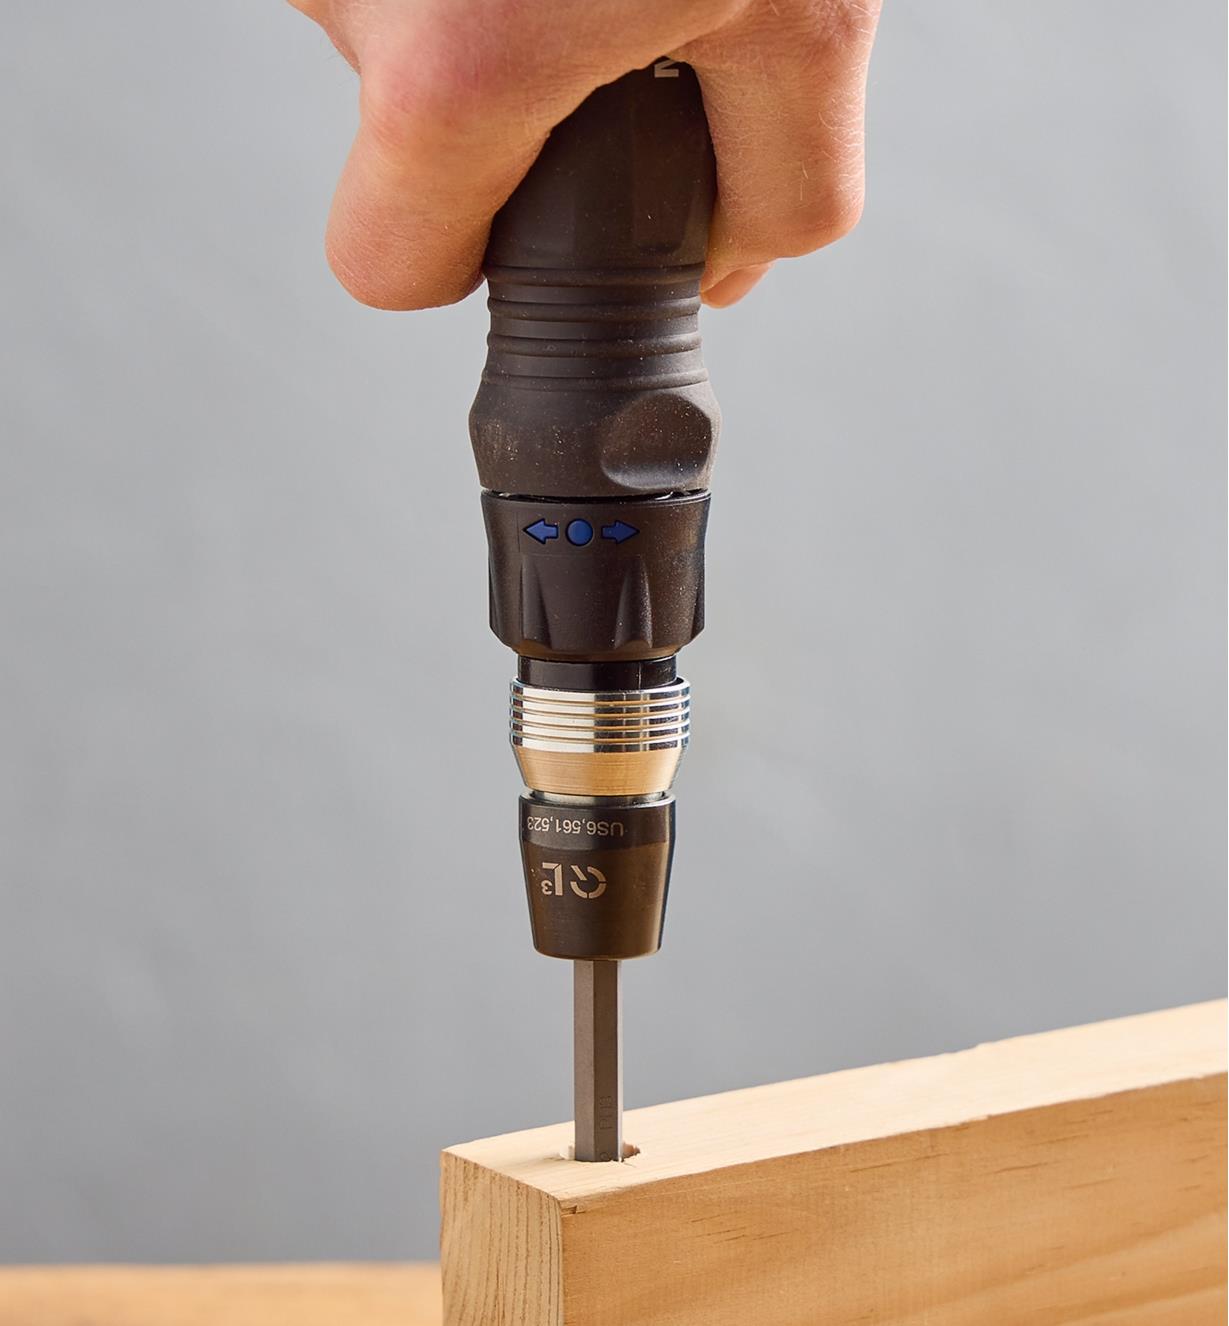 Using a 10-in-1 ratcheting screwdriver to access a recessed screw